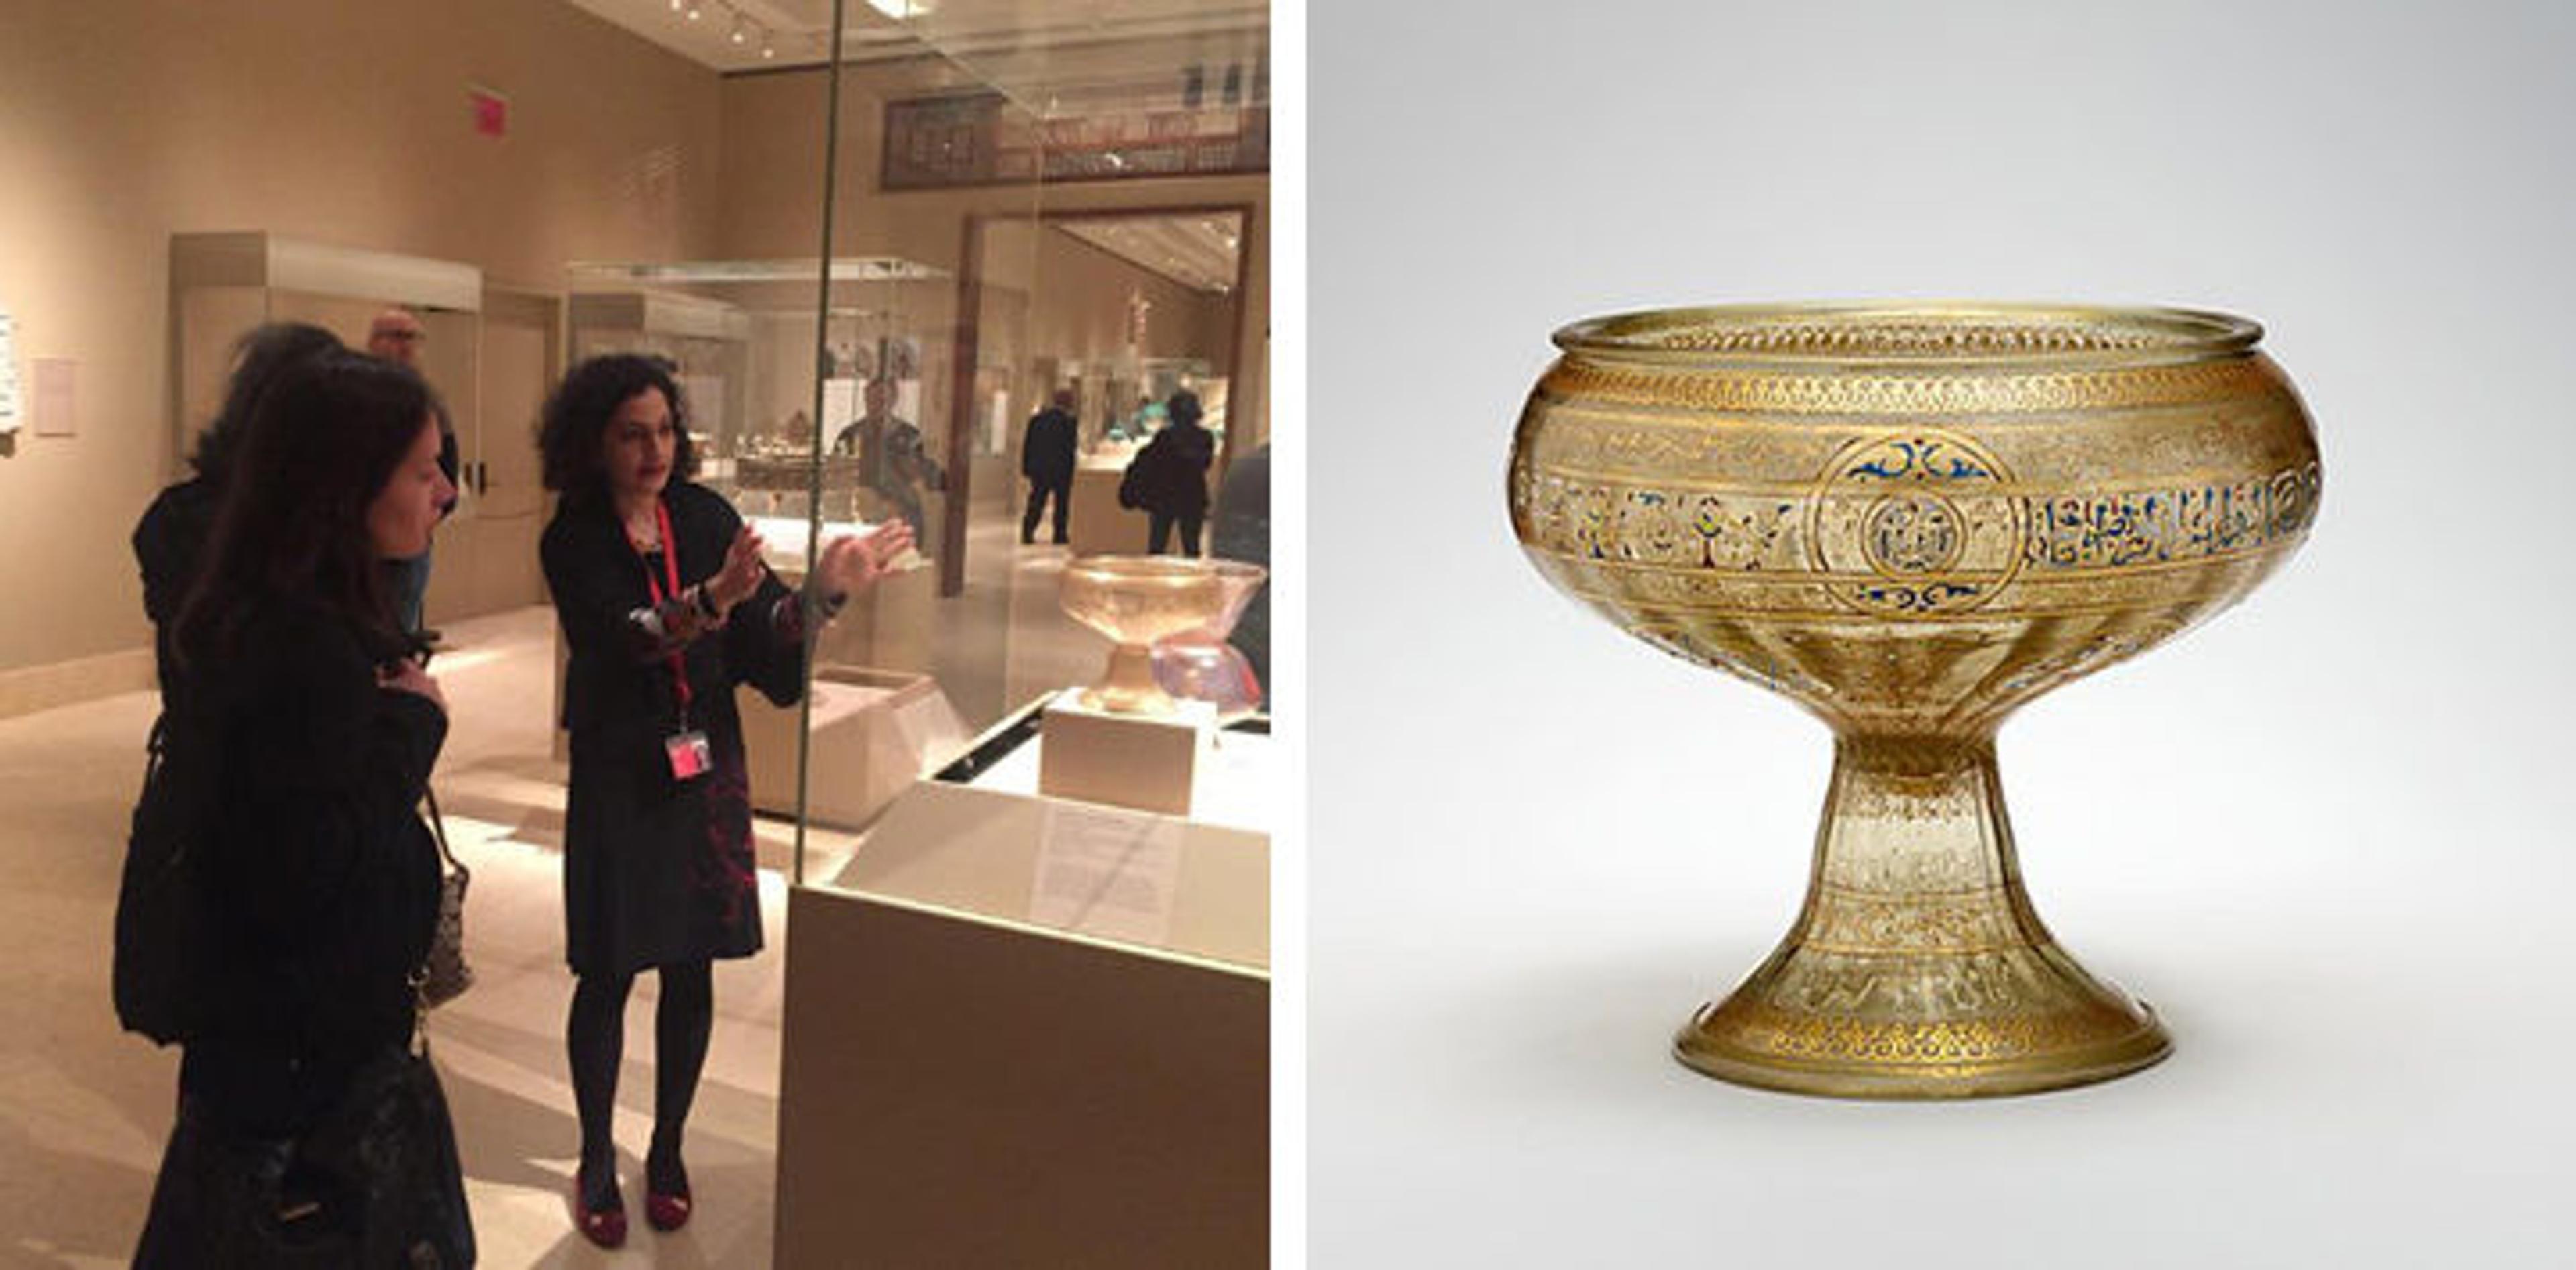 Curator discussing 13th-century glass vessel with visitor; image of vessel